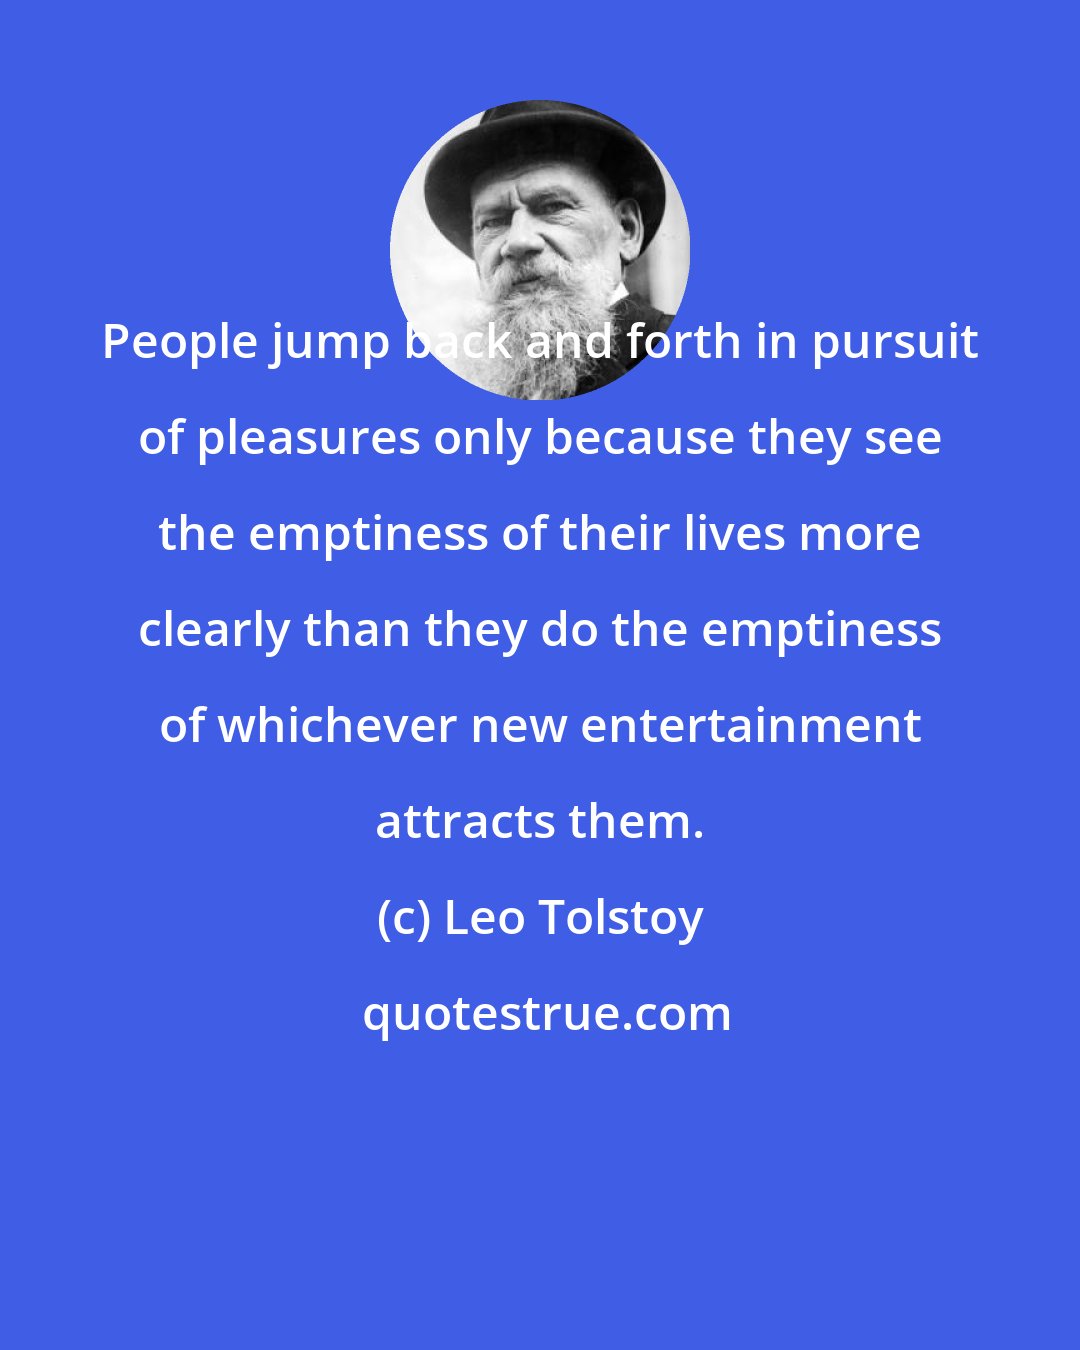 Leo Tolstoy: People jump back and forth in pursuit of pleasures only because they see the emptiness of their lives more clearly than they do the emptiness of whichever new entertainment attracts them.